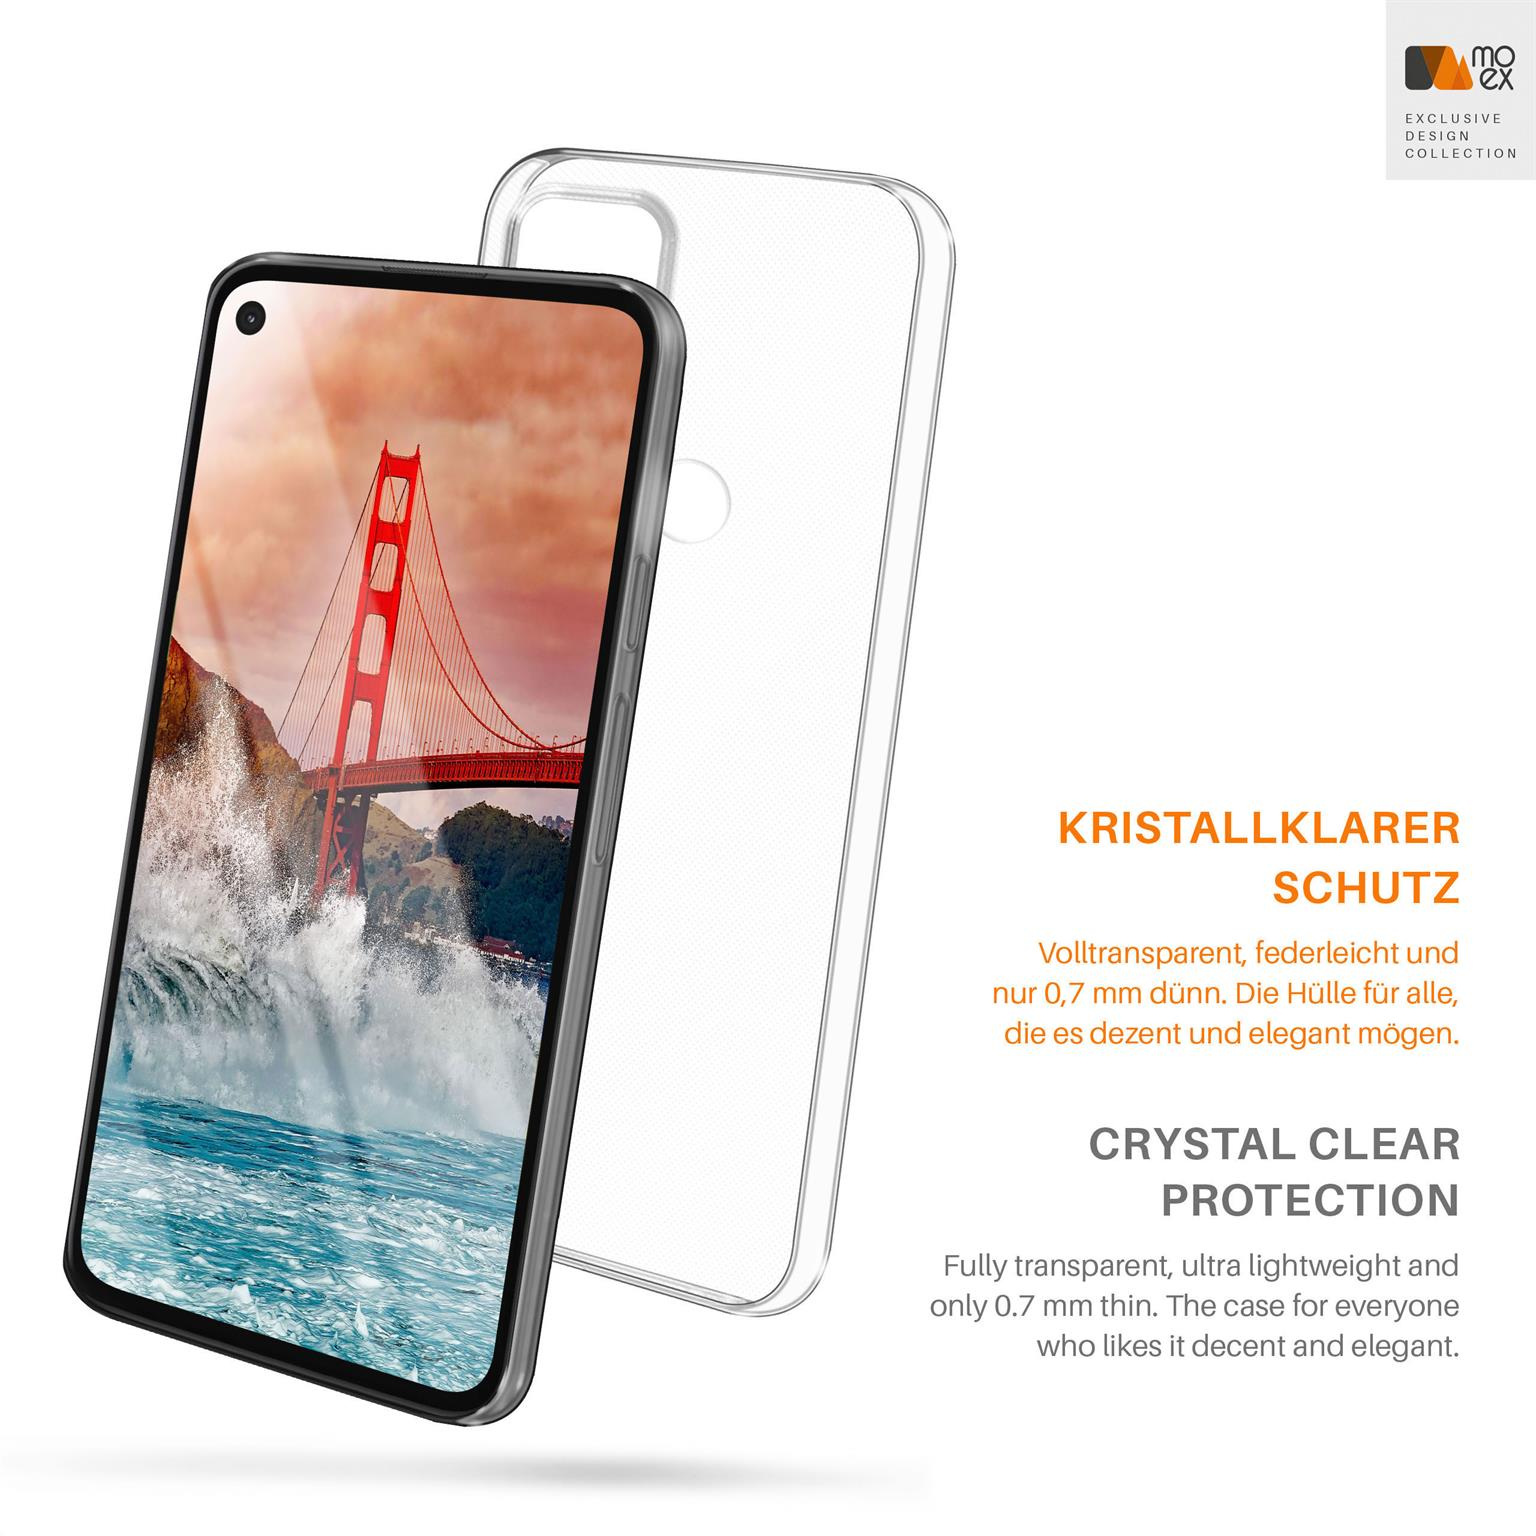 Pixel Backcover, MOEX Crystal-Clear Case, Aero 4a, Google,